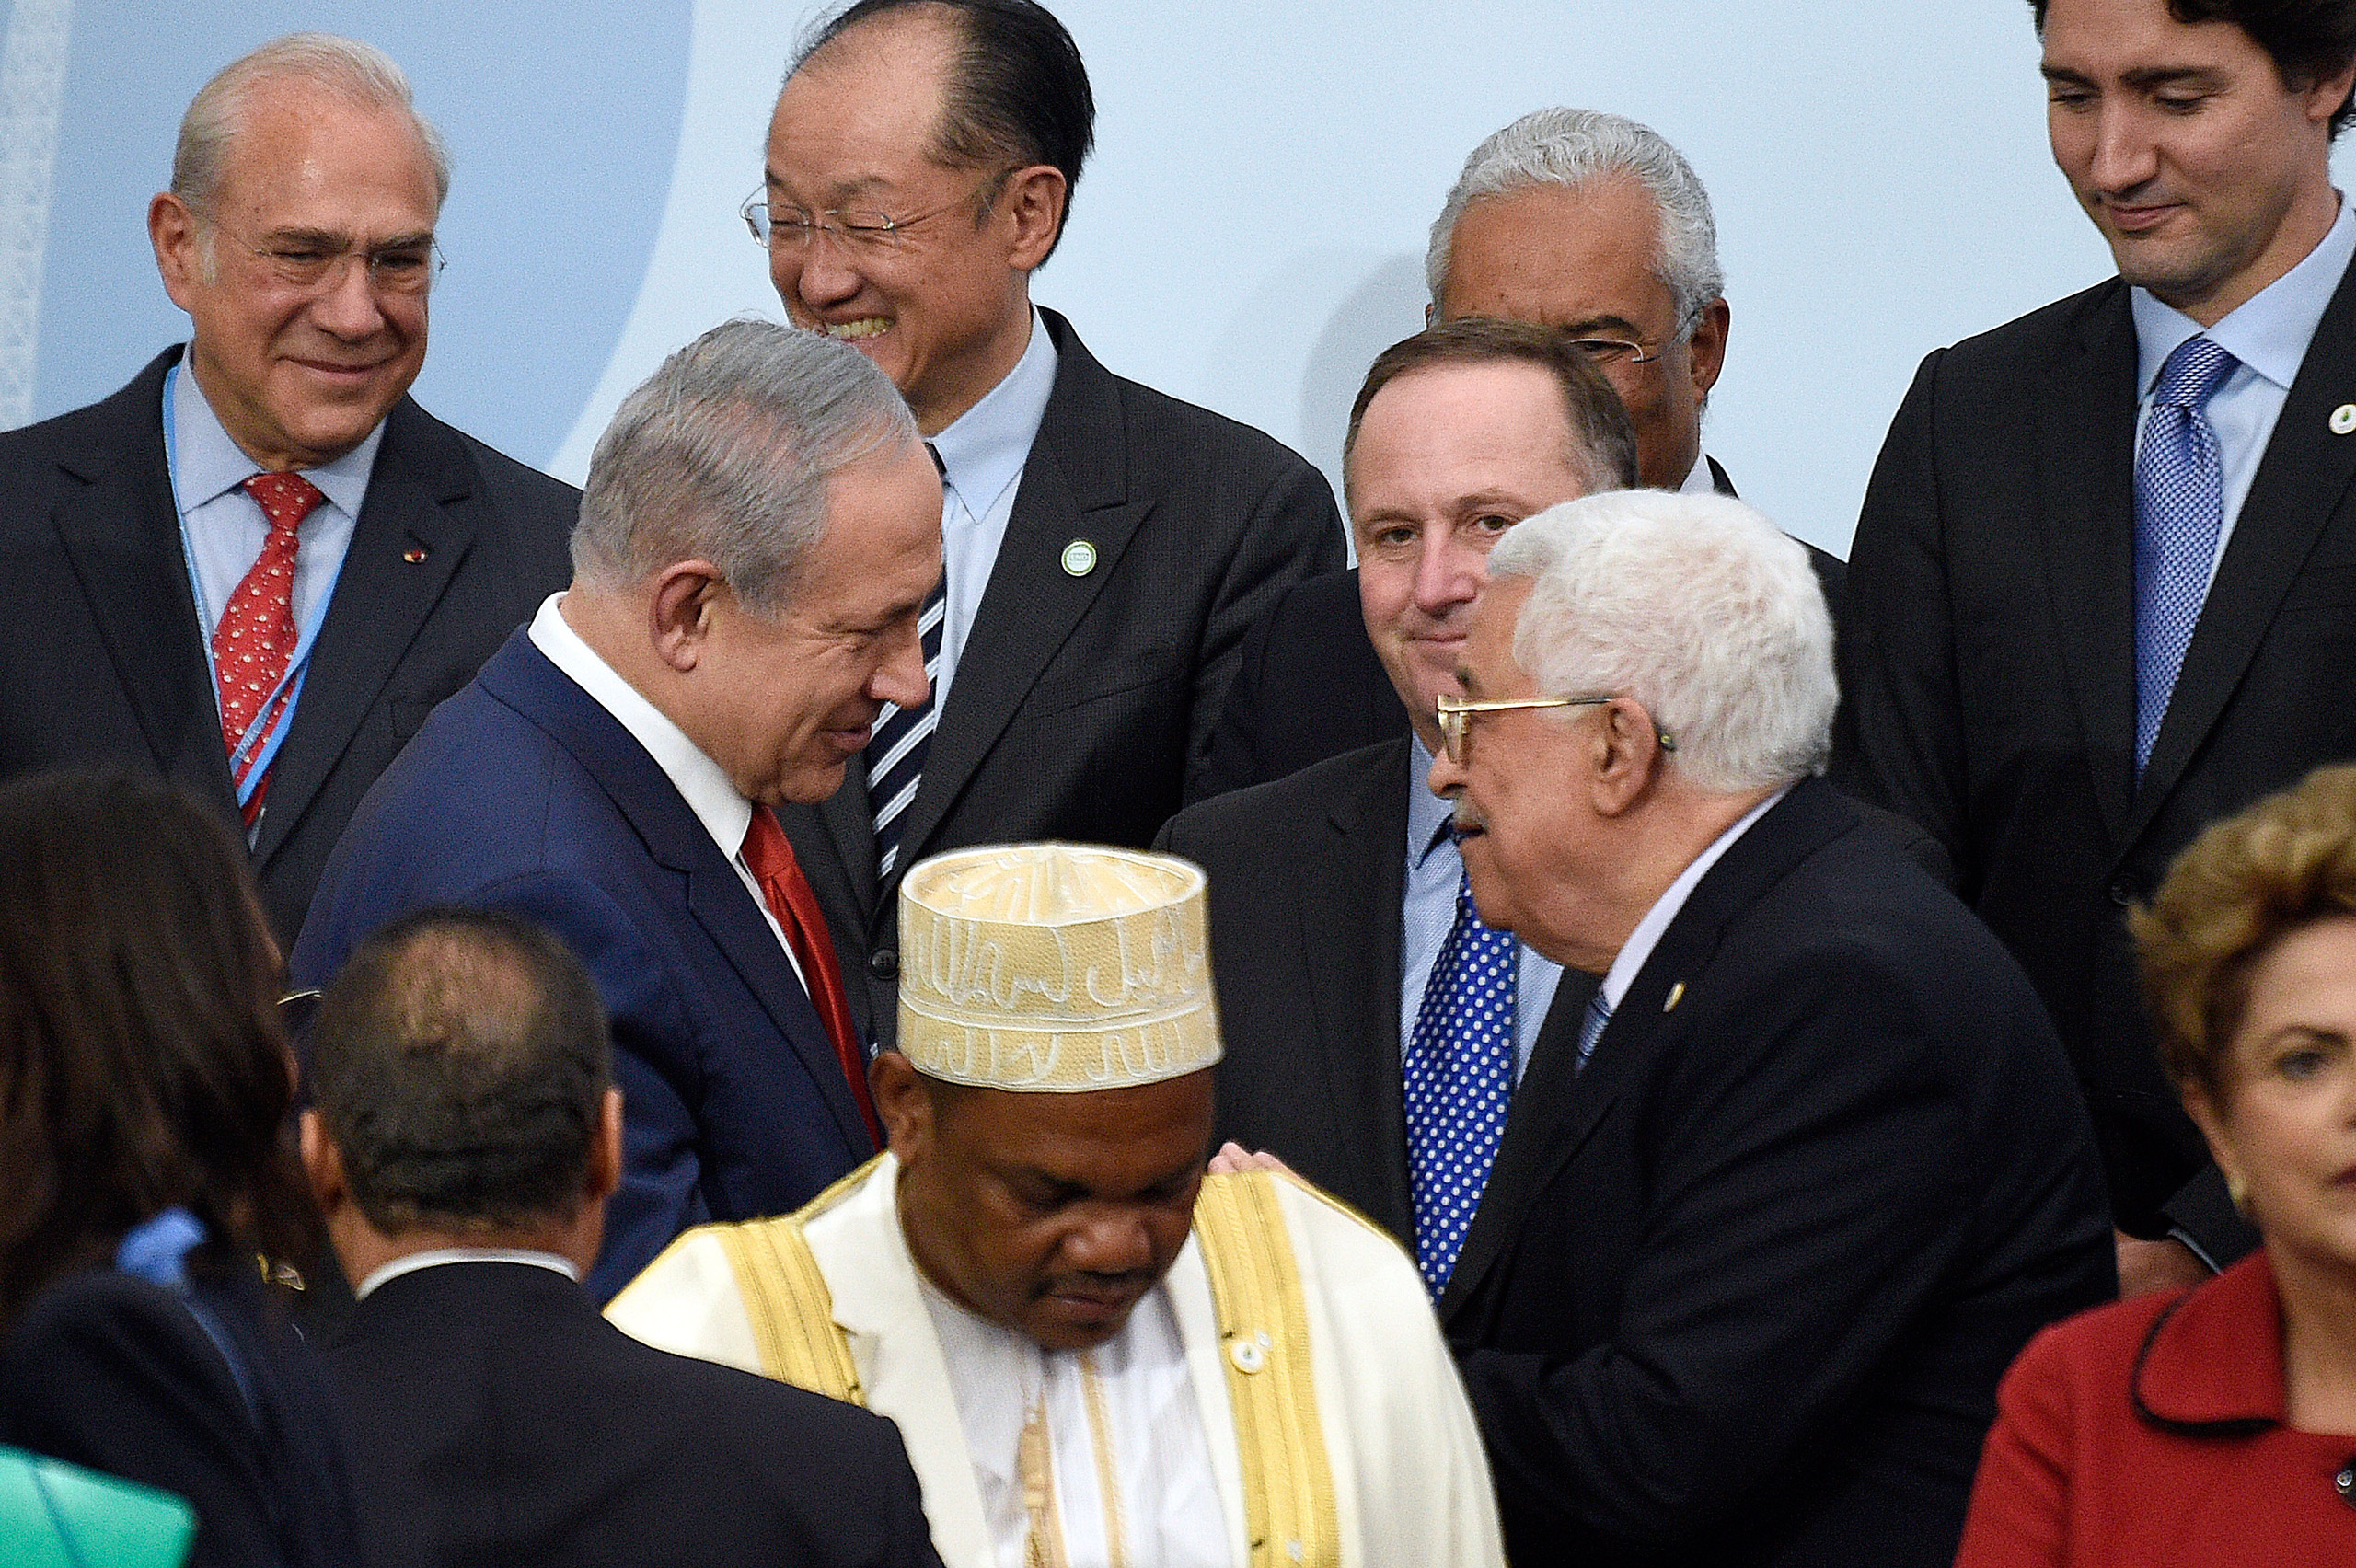 Israeli Prime Minister Benjamin Netanyahu, center left, talks with Palestinian President Mahmoud Abbas, center right, at the COP21 United Nations Climate Change Conference in Le Bourget, France, on Nov. 30, 2015. (Martin Bureau—AP)